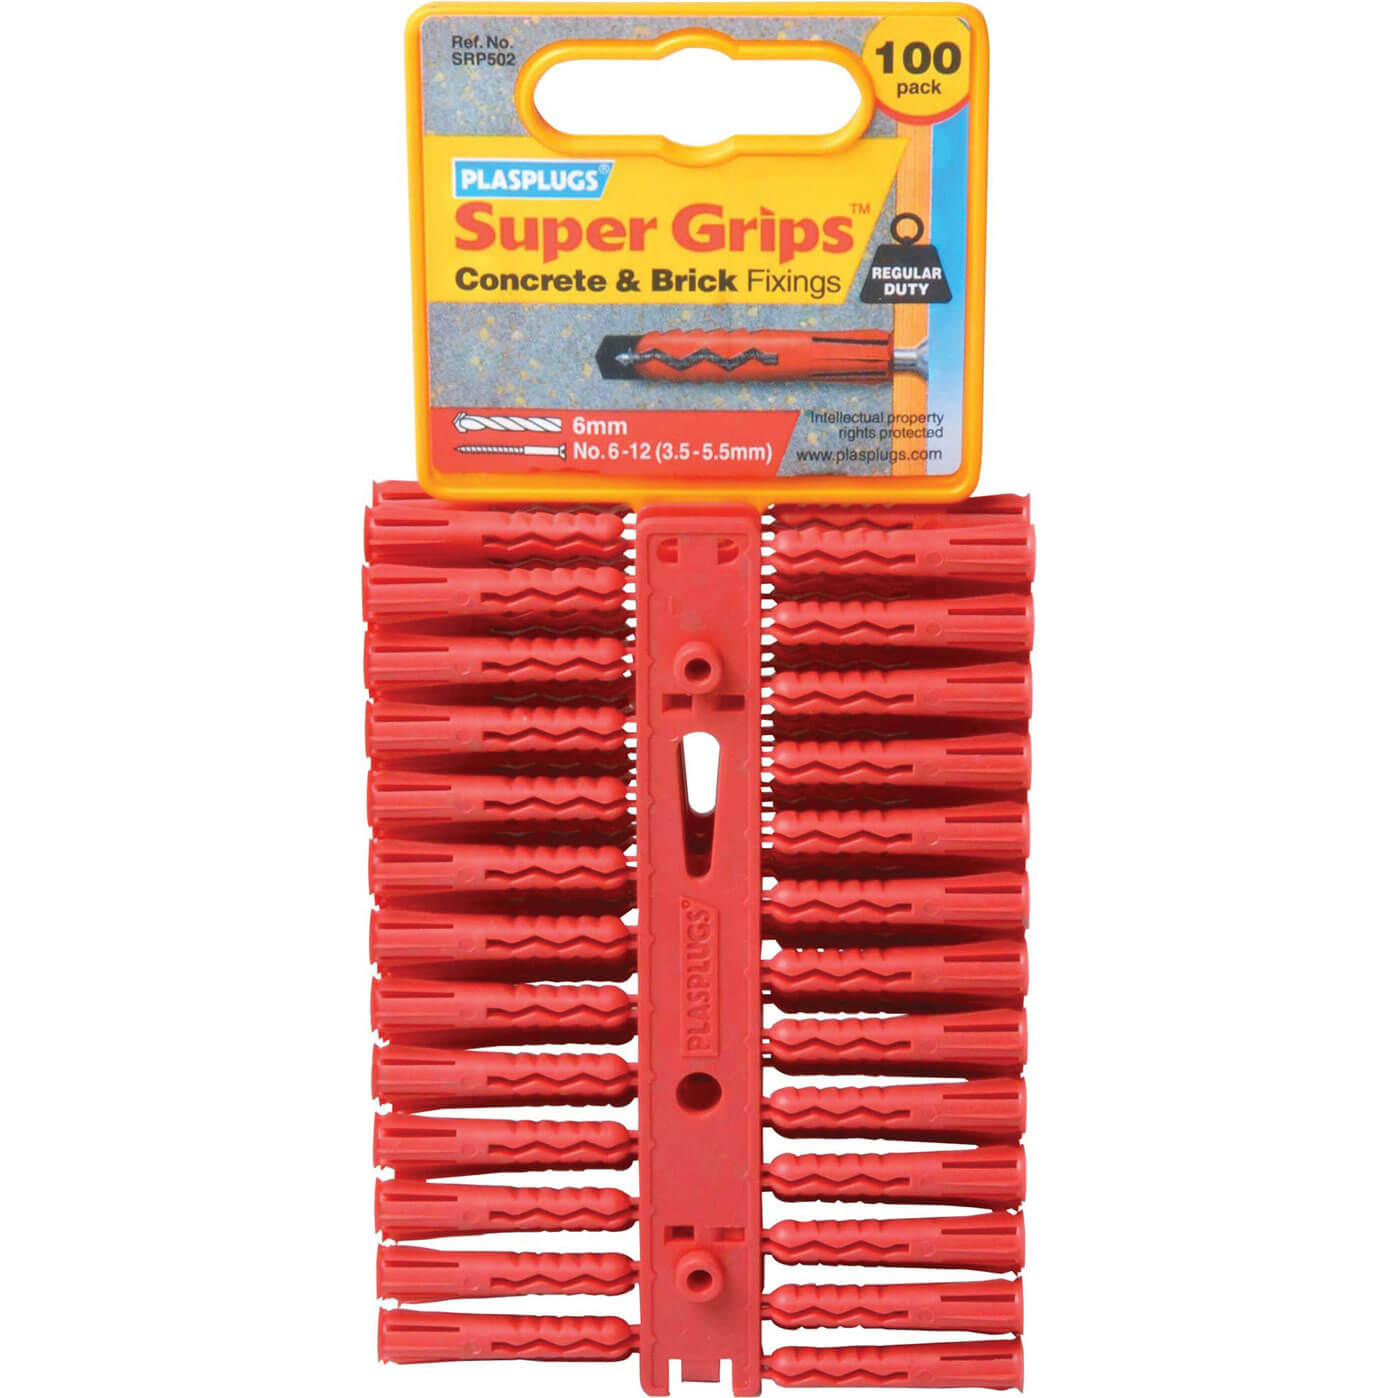 Image of Plasplugs Regular Duty Super Grips Concrete and Brick Fixings RED Pack of 100